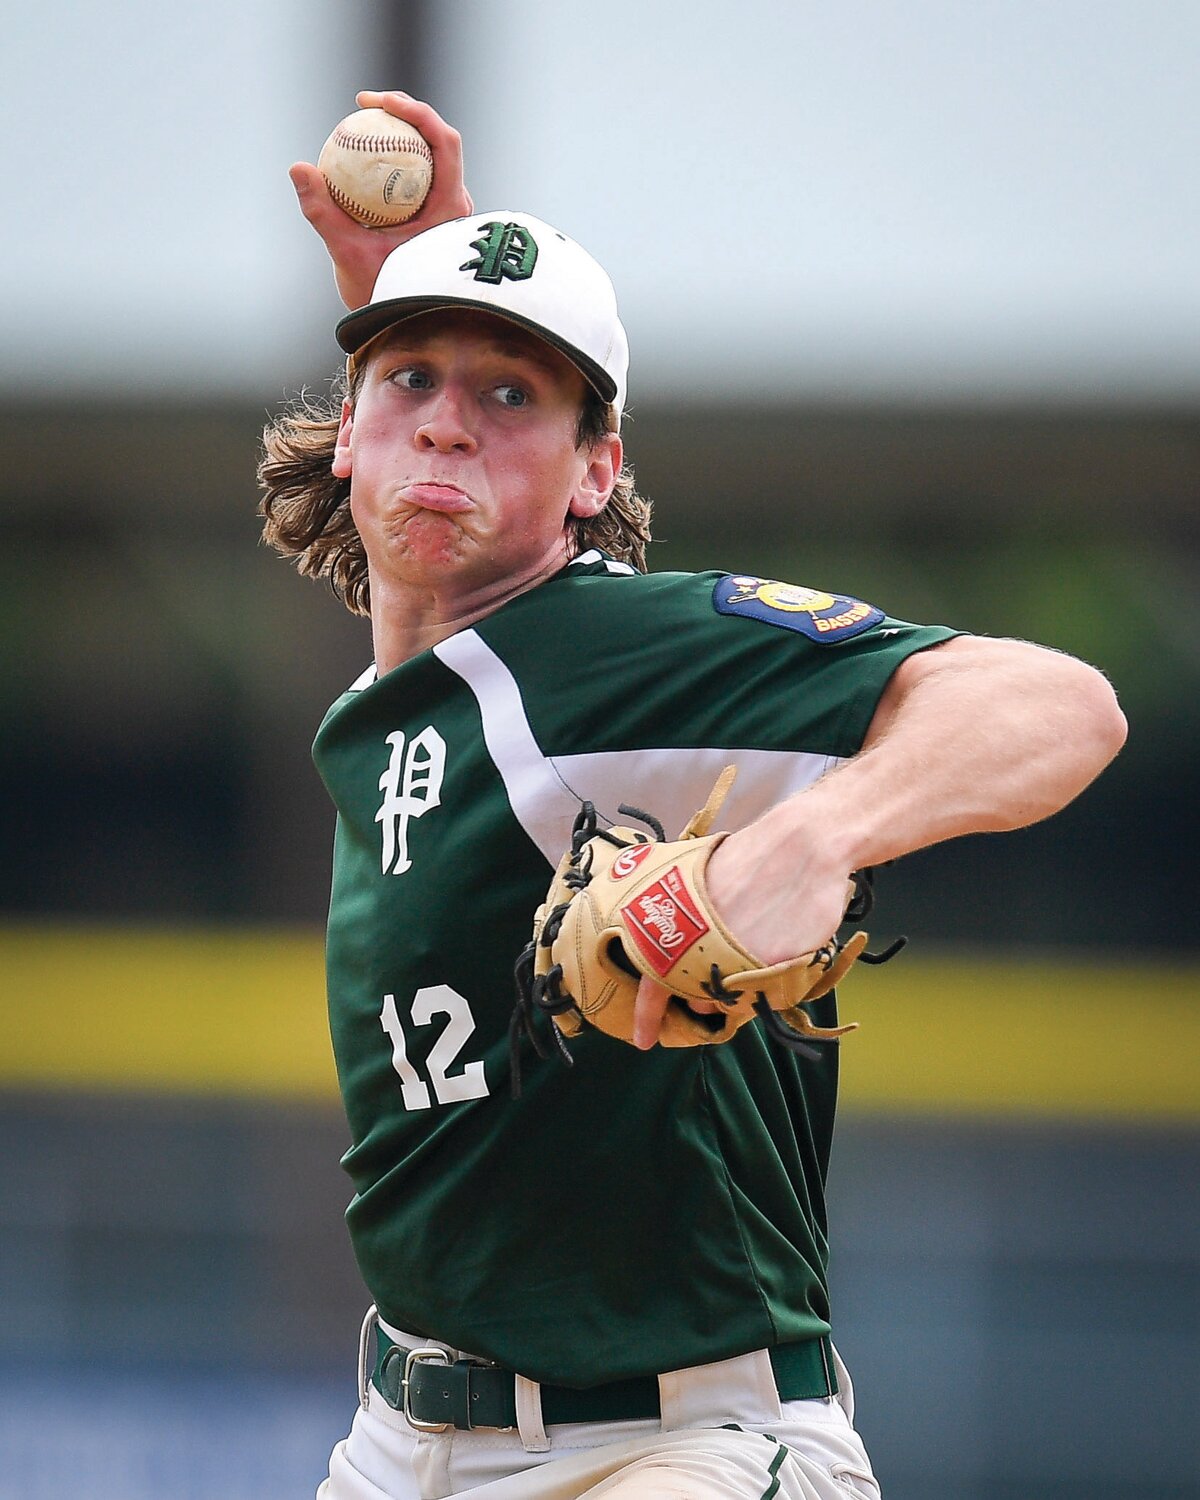 Pennridge’s Robbie Pliszka pitched a complete, five-inning shutout and added a grand slam in the first game of the twin bill. Pennridge won both games 10-0 and 12-1.